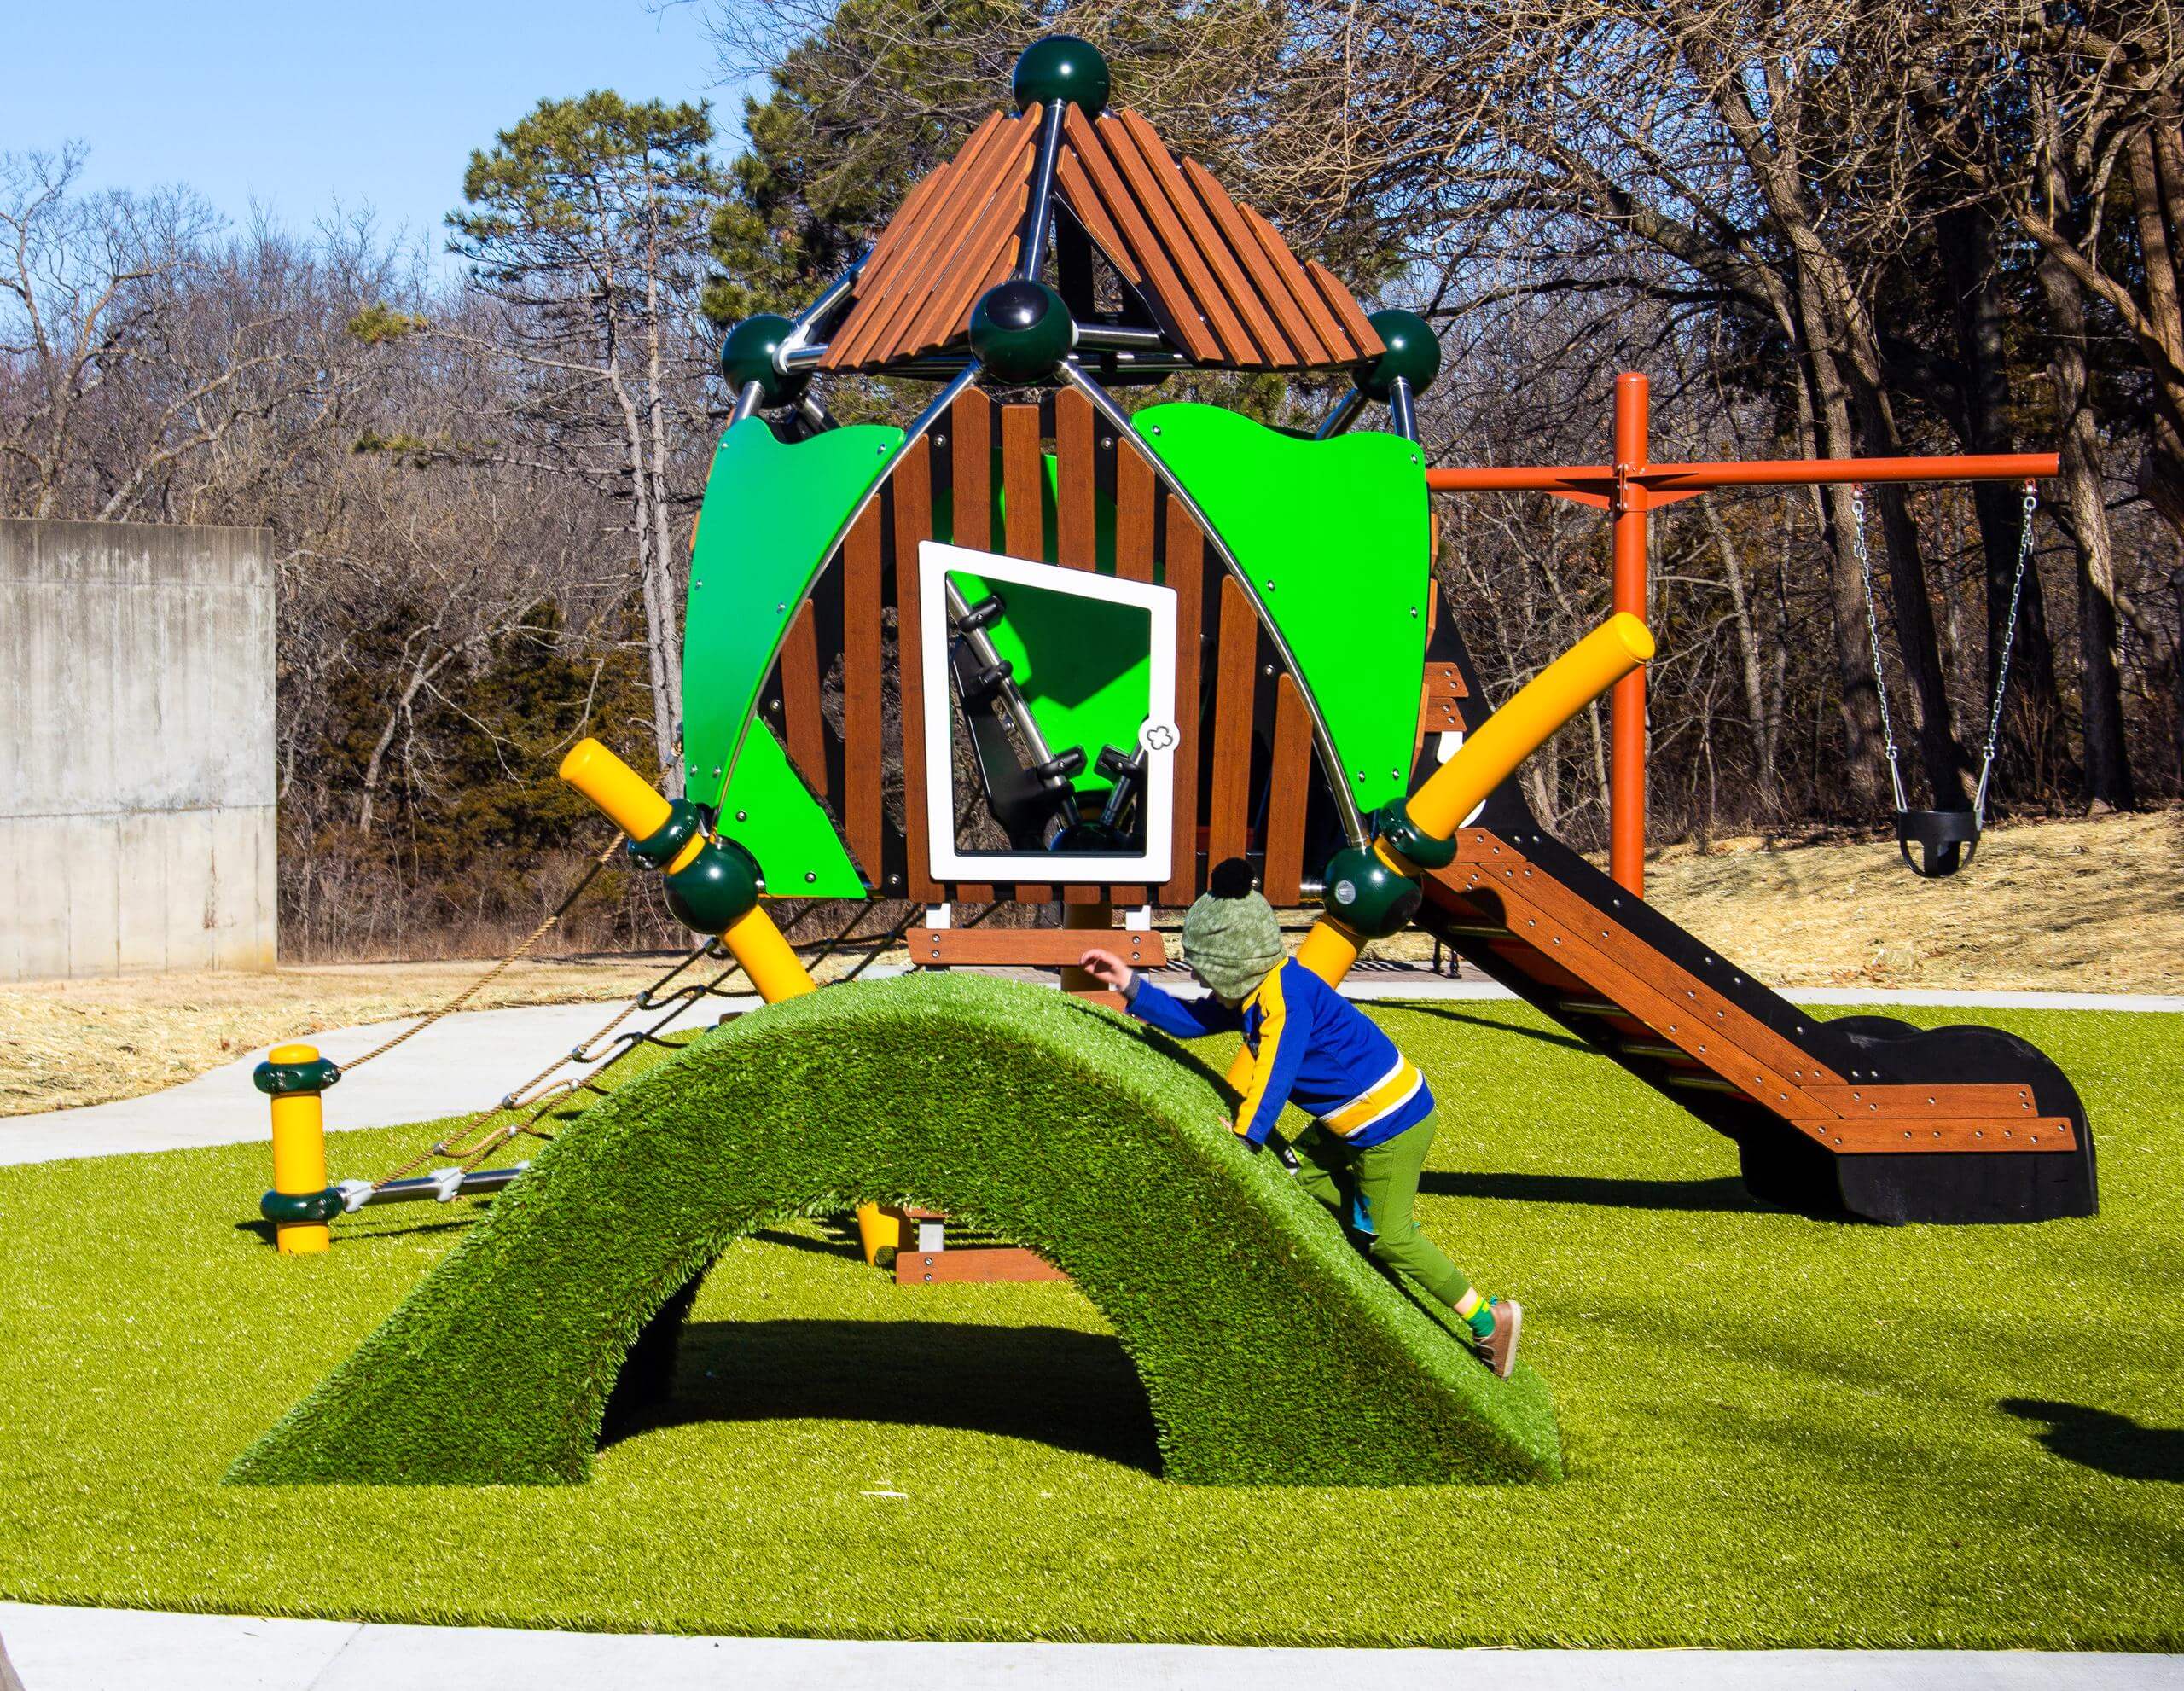 Child climbing on hilly mound with slide and playset in background.